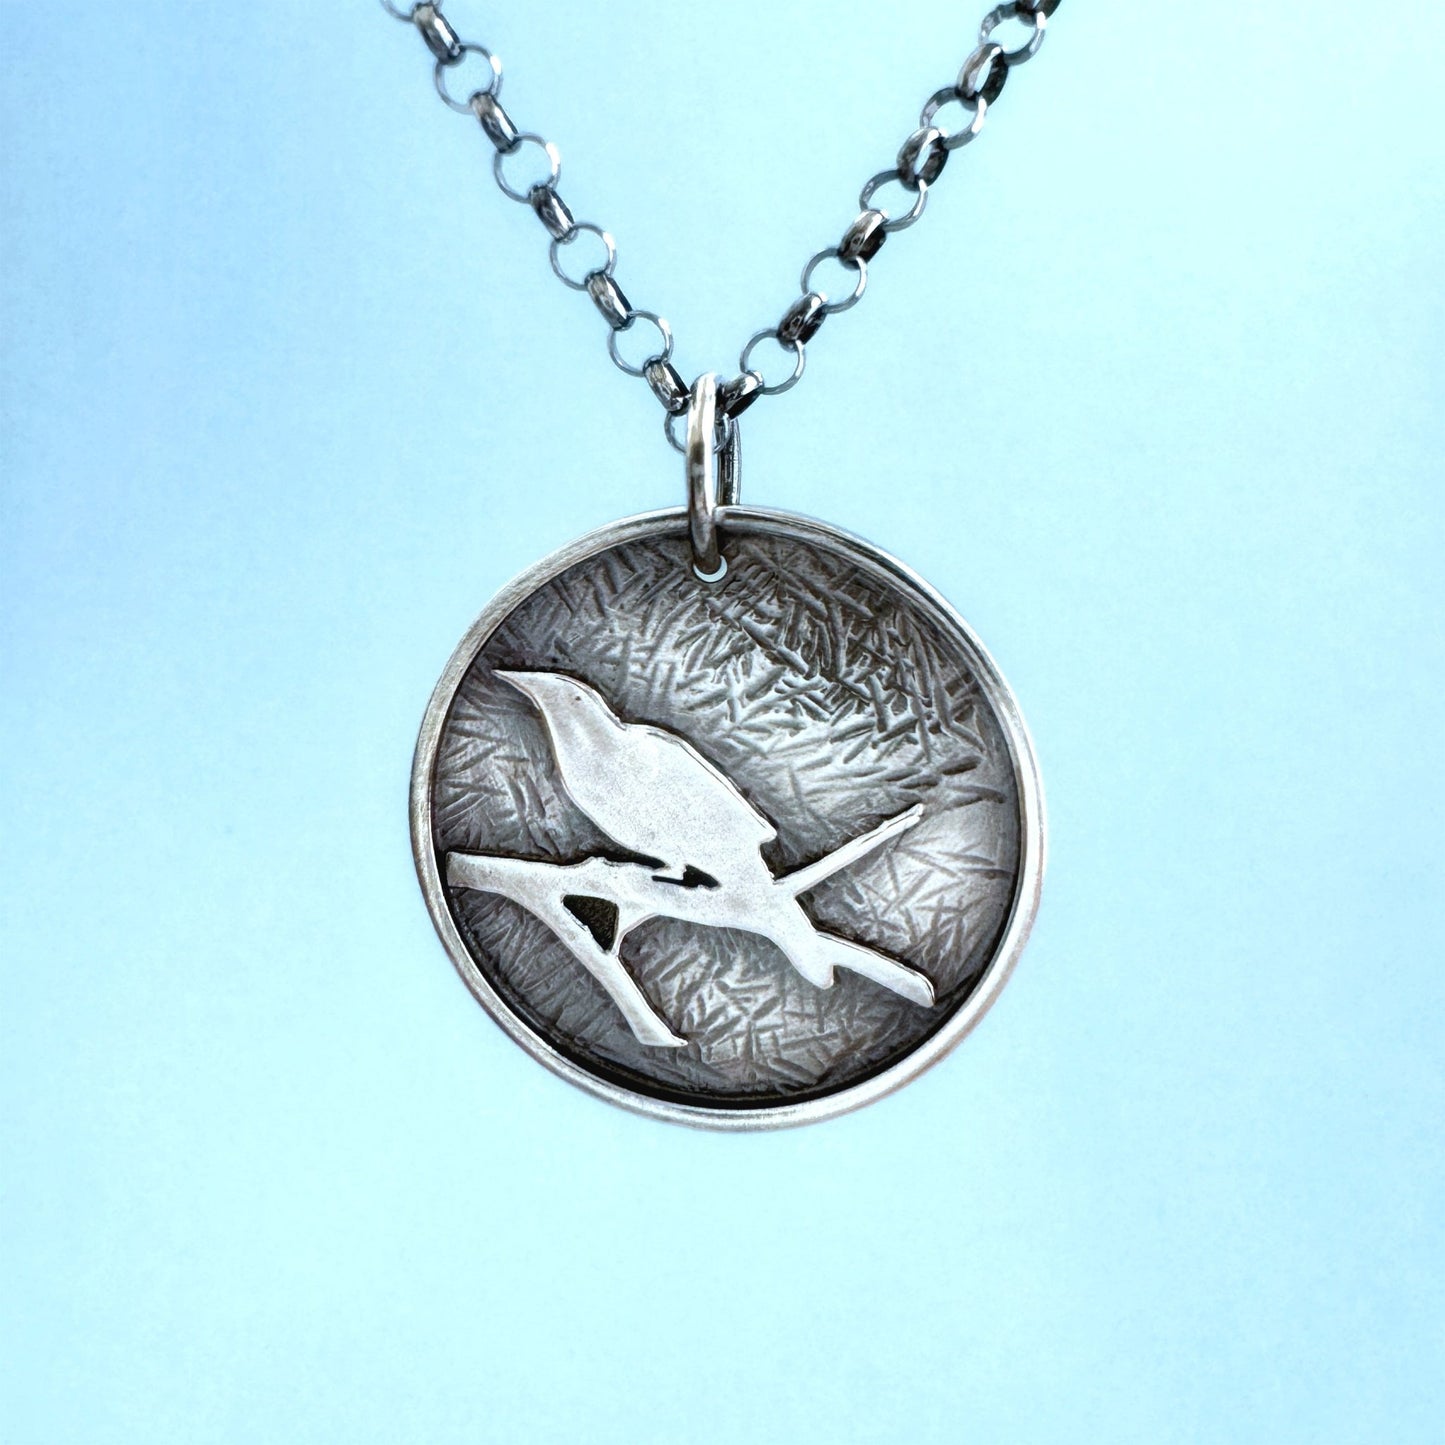 A round sterling silver pendant hangs from a rolo style chain. The pendant features a raised raven or crow sitting on the branch of a tree. The background has been hammered to represent leaves. The necklace is hanging in front of a pale blue background.